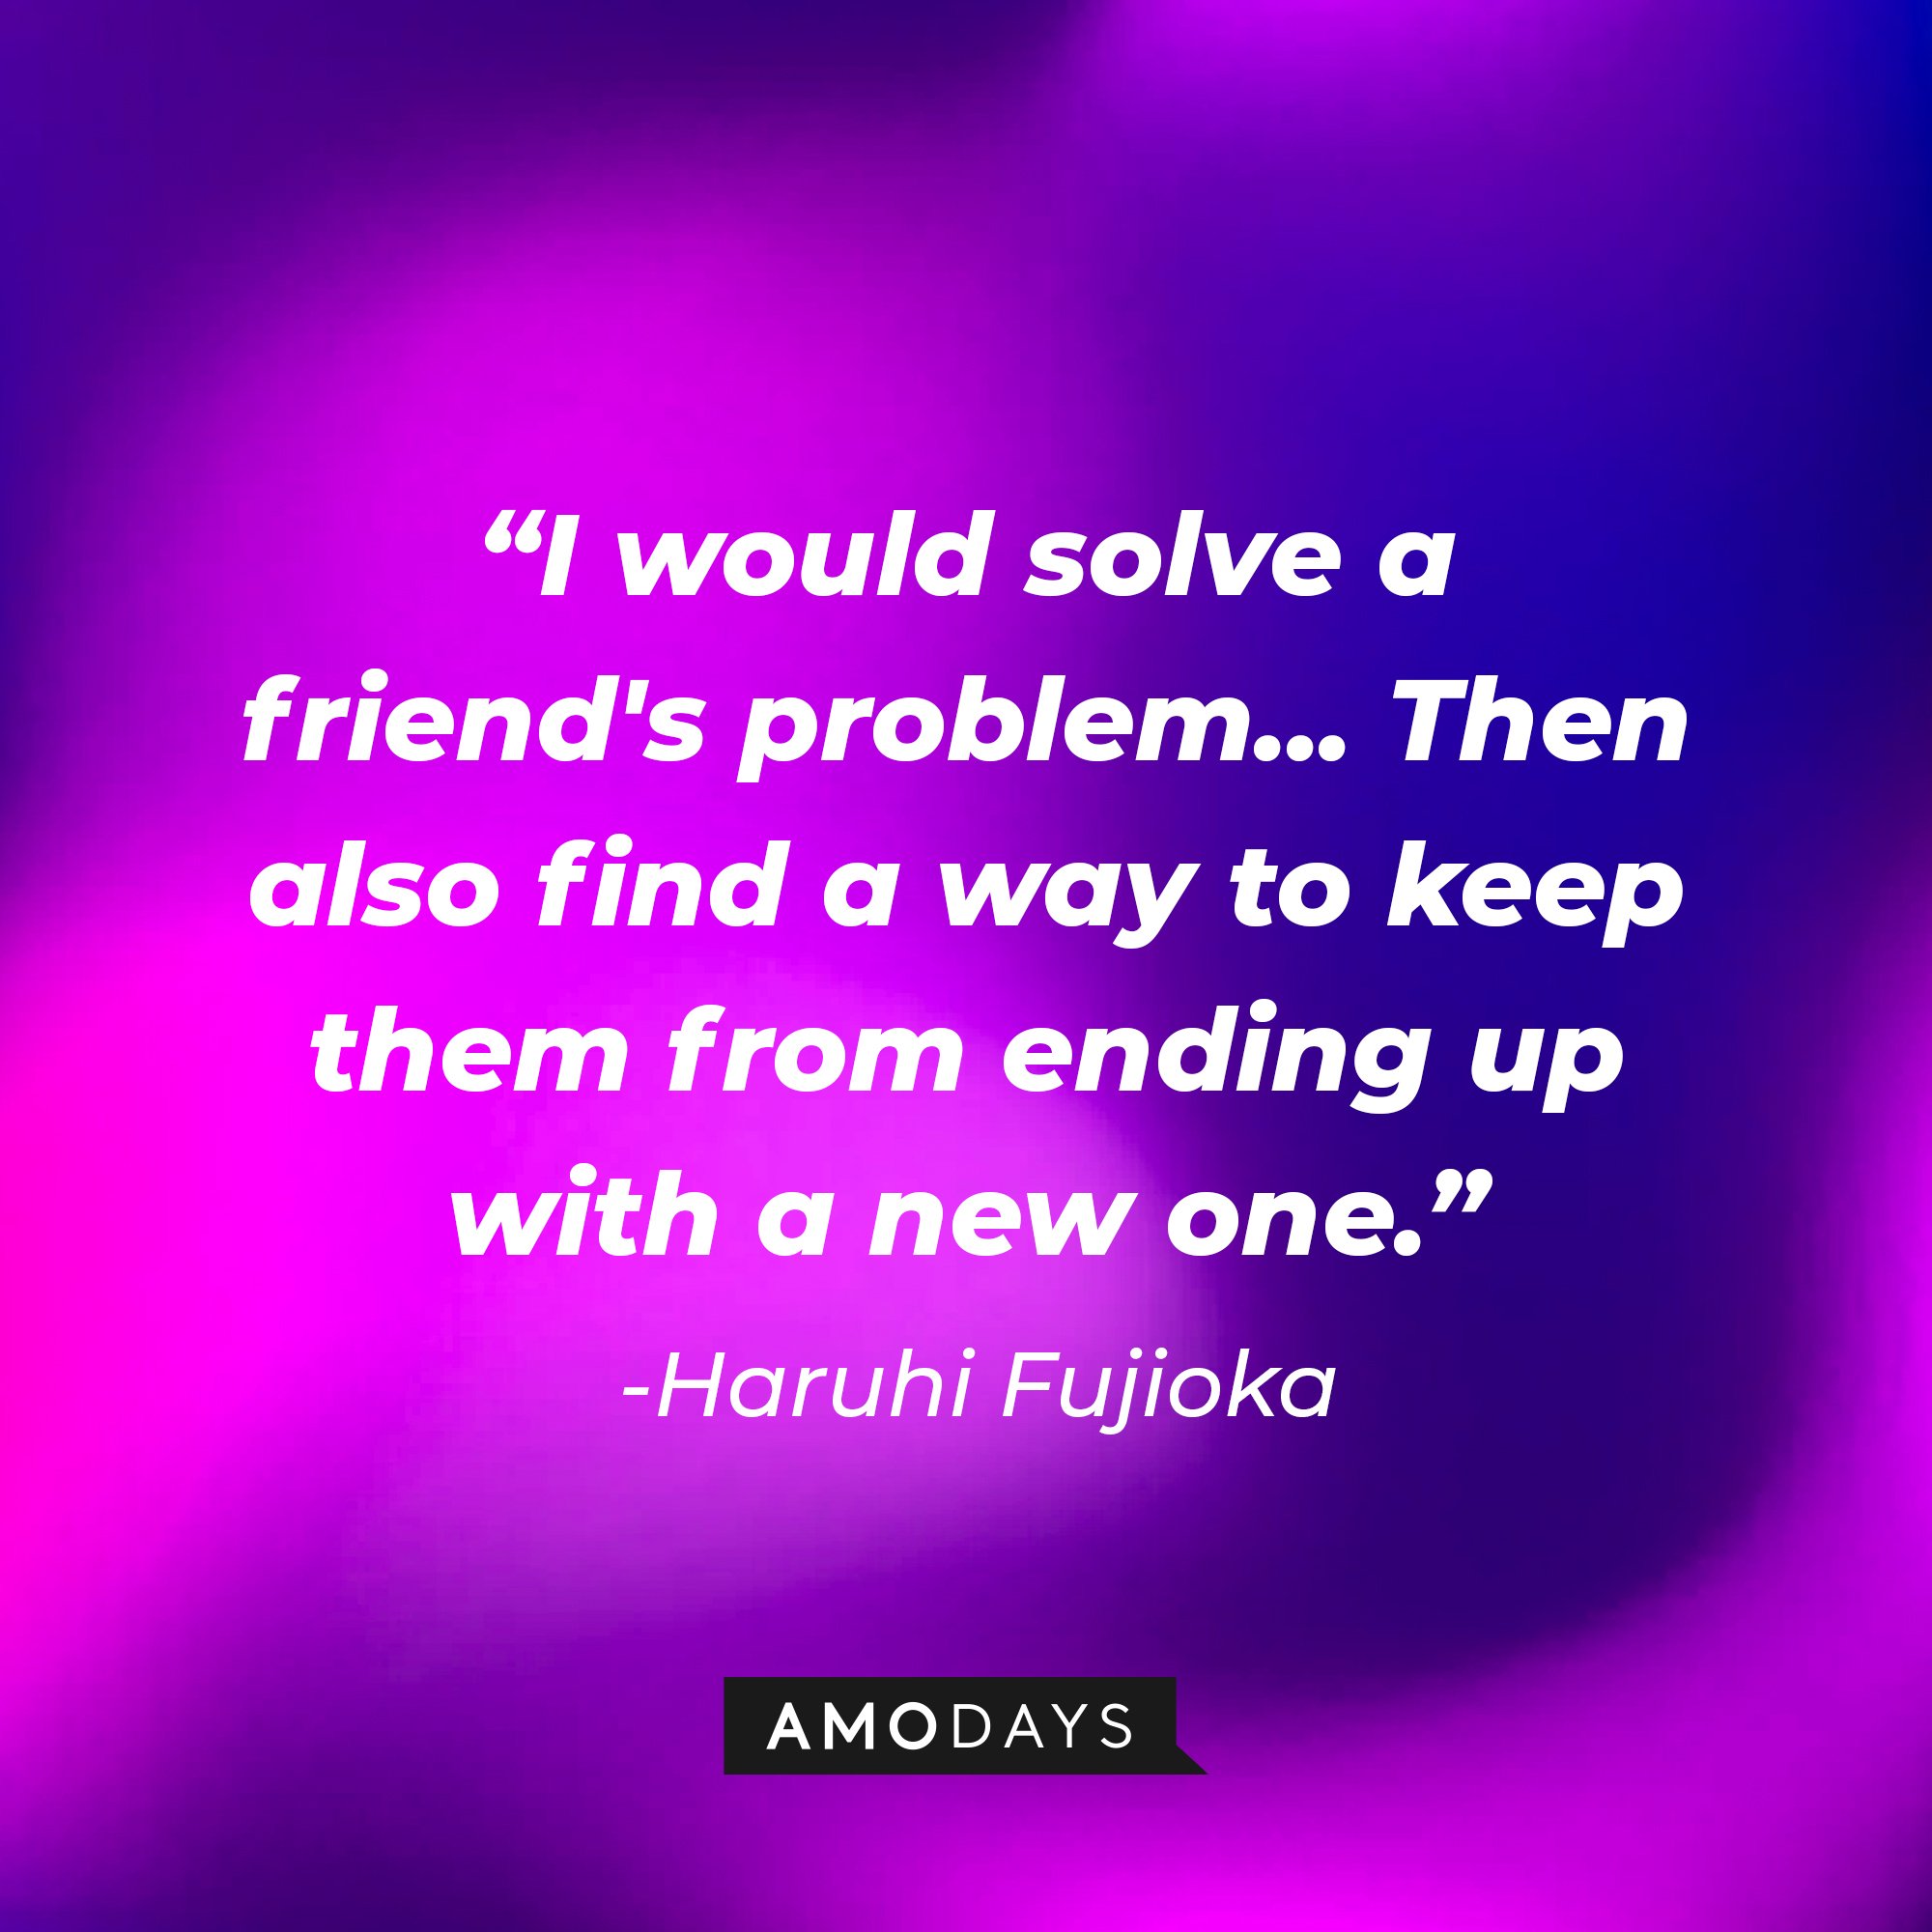 Haruhi Fujioka’s quote: "I would solve a friend's problem... Then also find a way to keep them from ending up with a new one." | Image: AmoDays